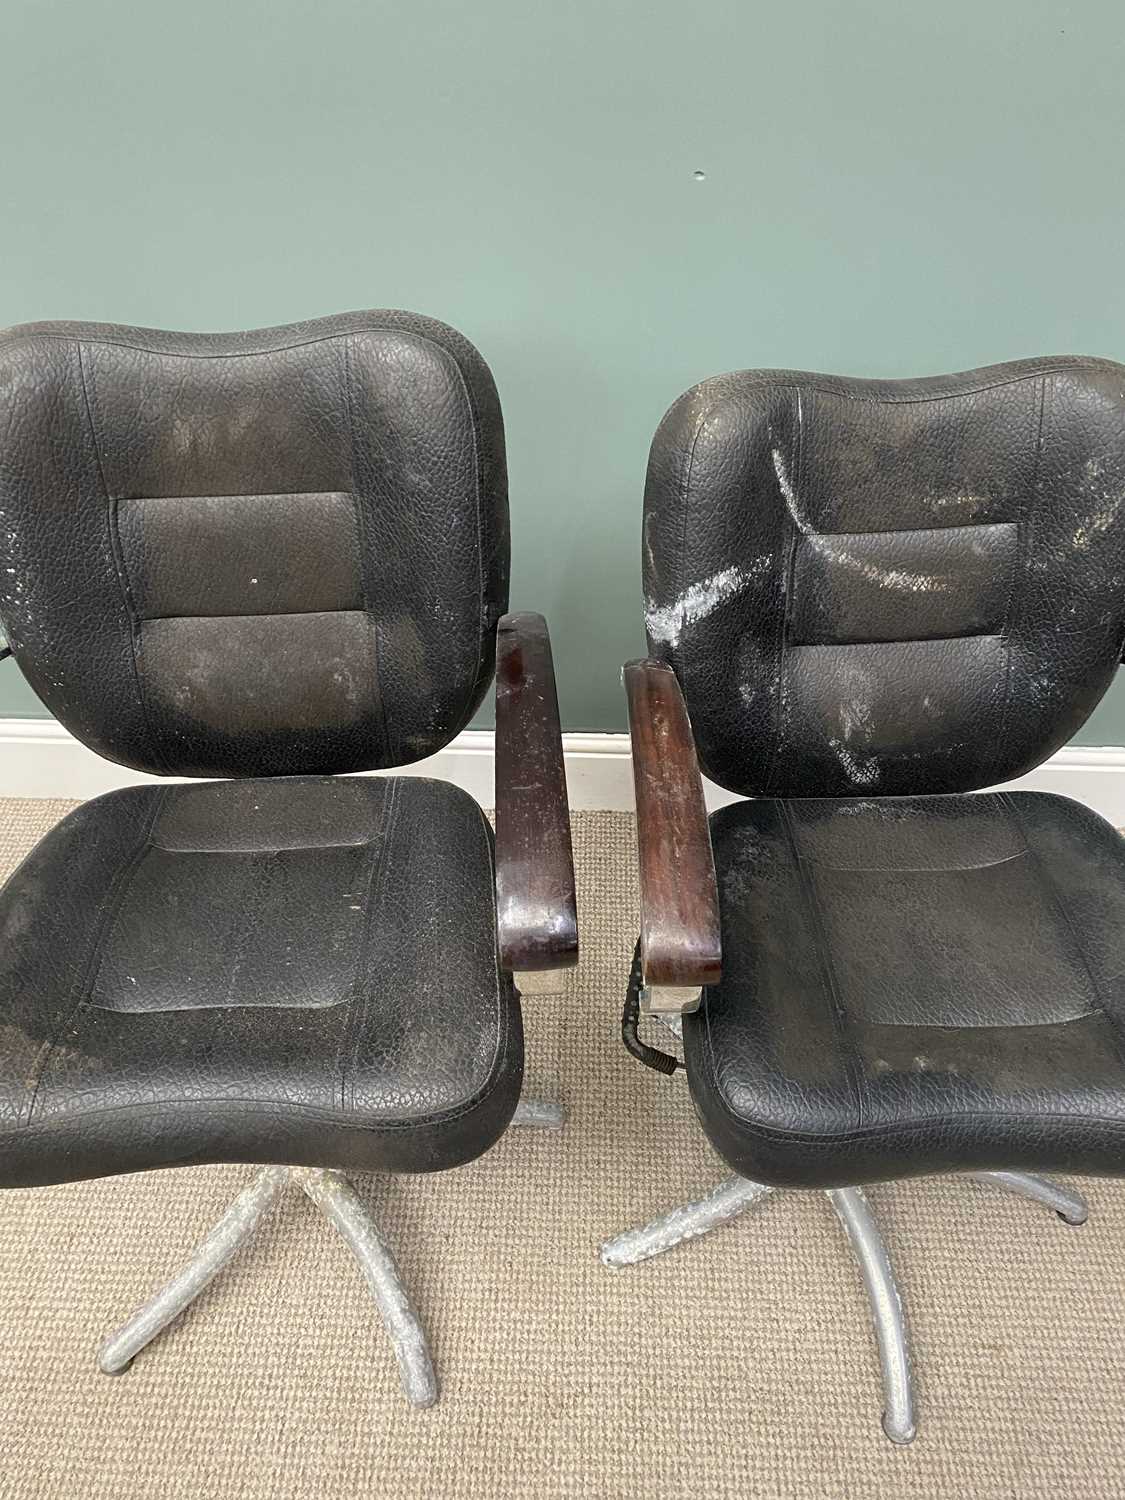 TWO VINTAGE ADJUSTABLE BARBERS' CHAIRS 99 (h) x 60 (w) x 44cms (d) Provenance: private collection - Image 7 of 7